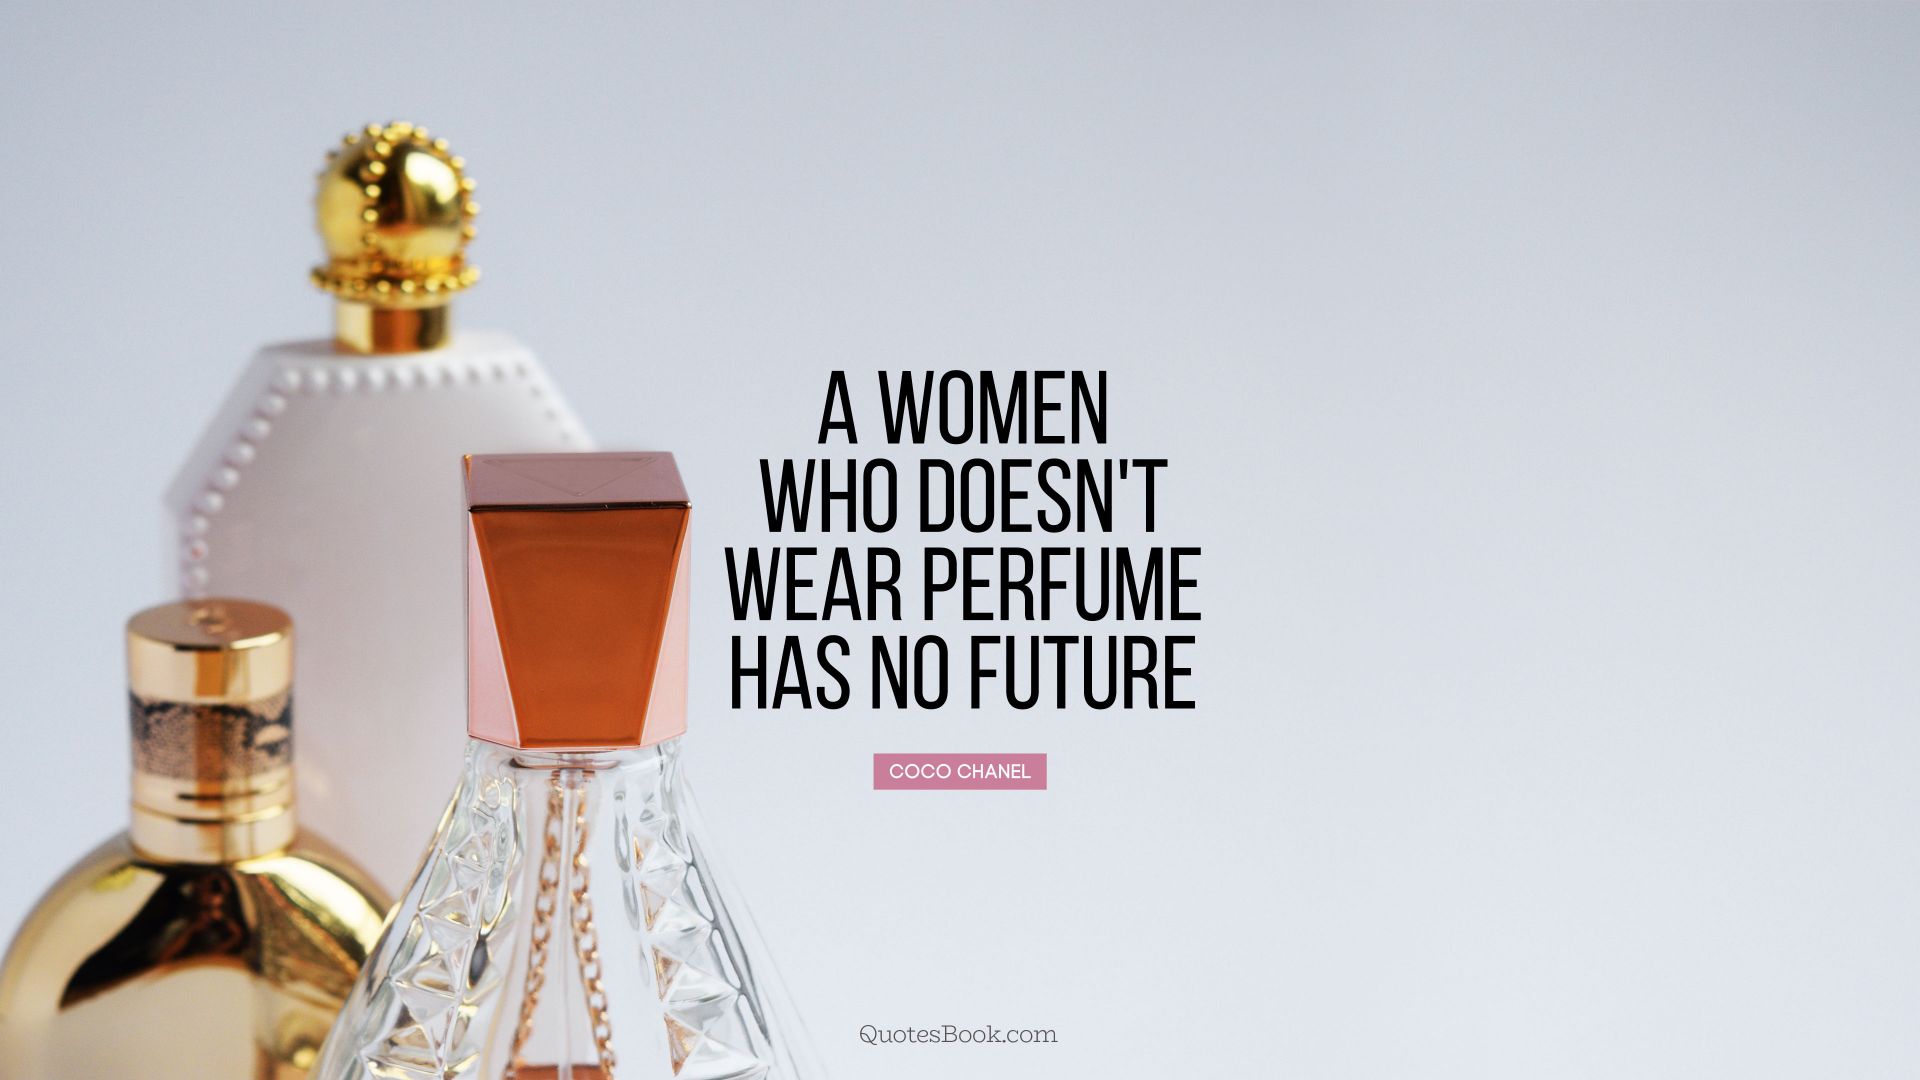 A women who doesn't wear perfume has no future. - Quote by Coco Chanel